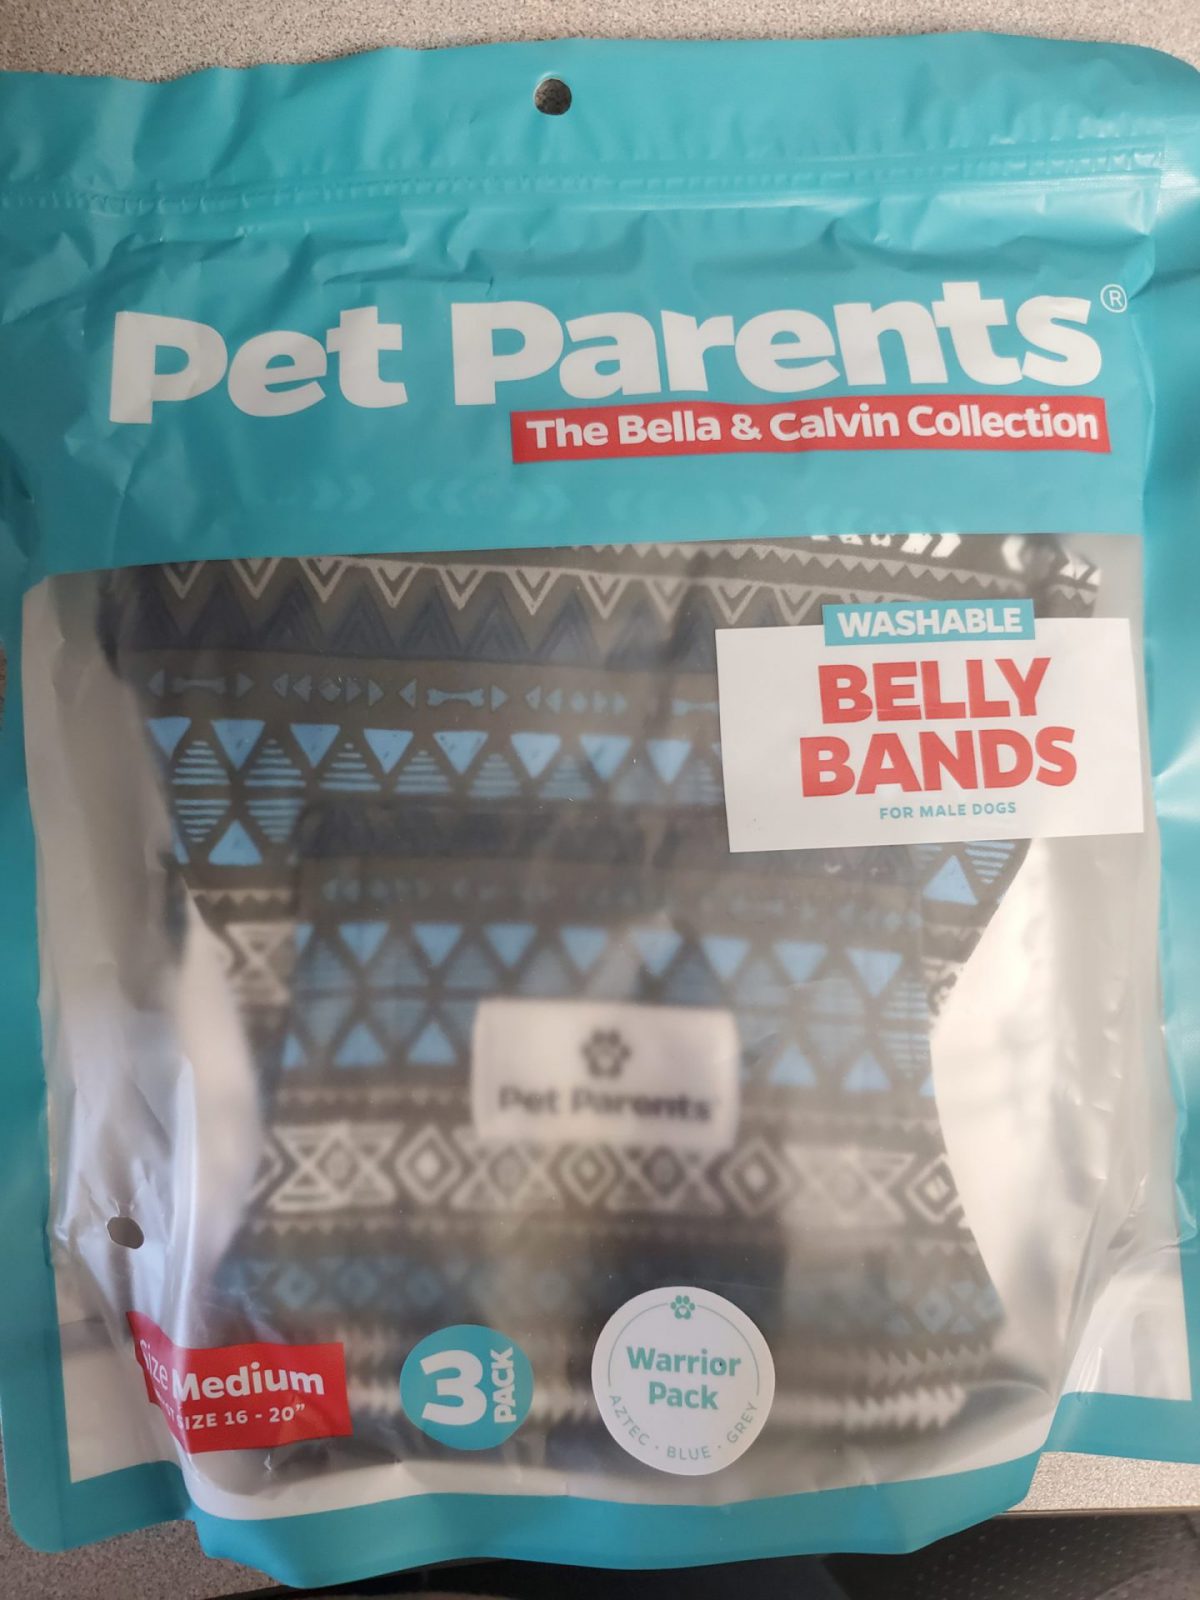 Pet Parents Washable Belly Bands for Male Dogs3 pack Med